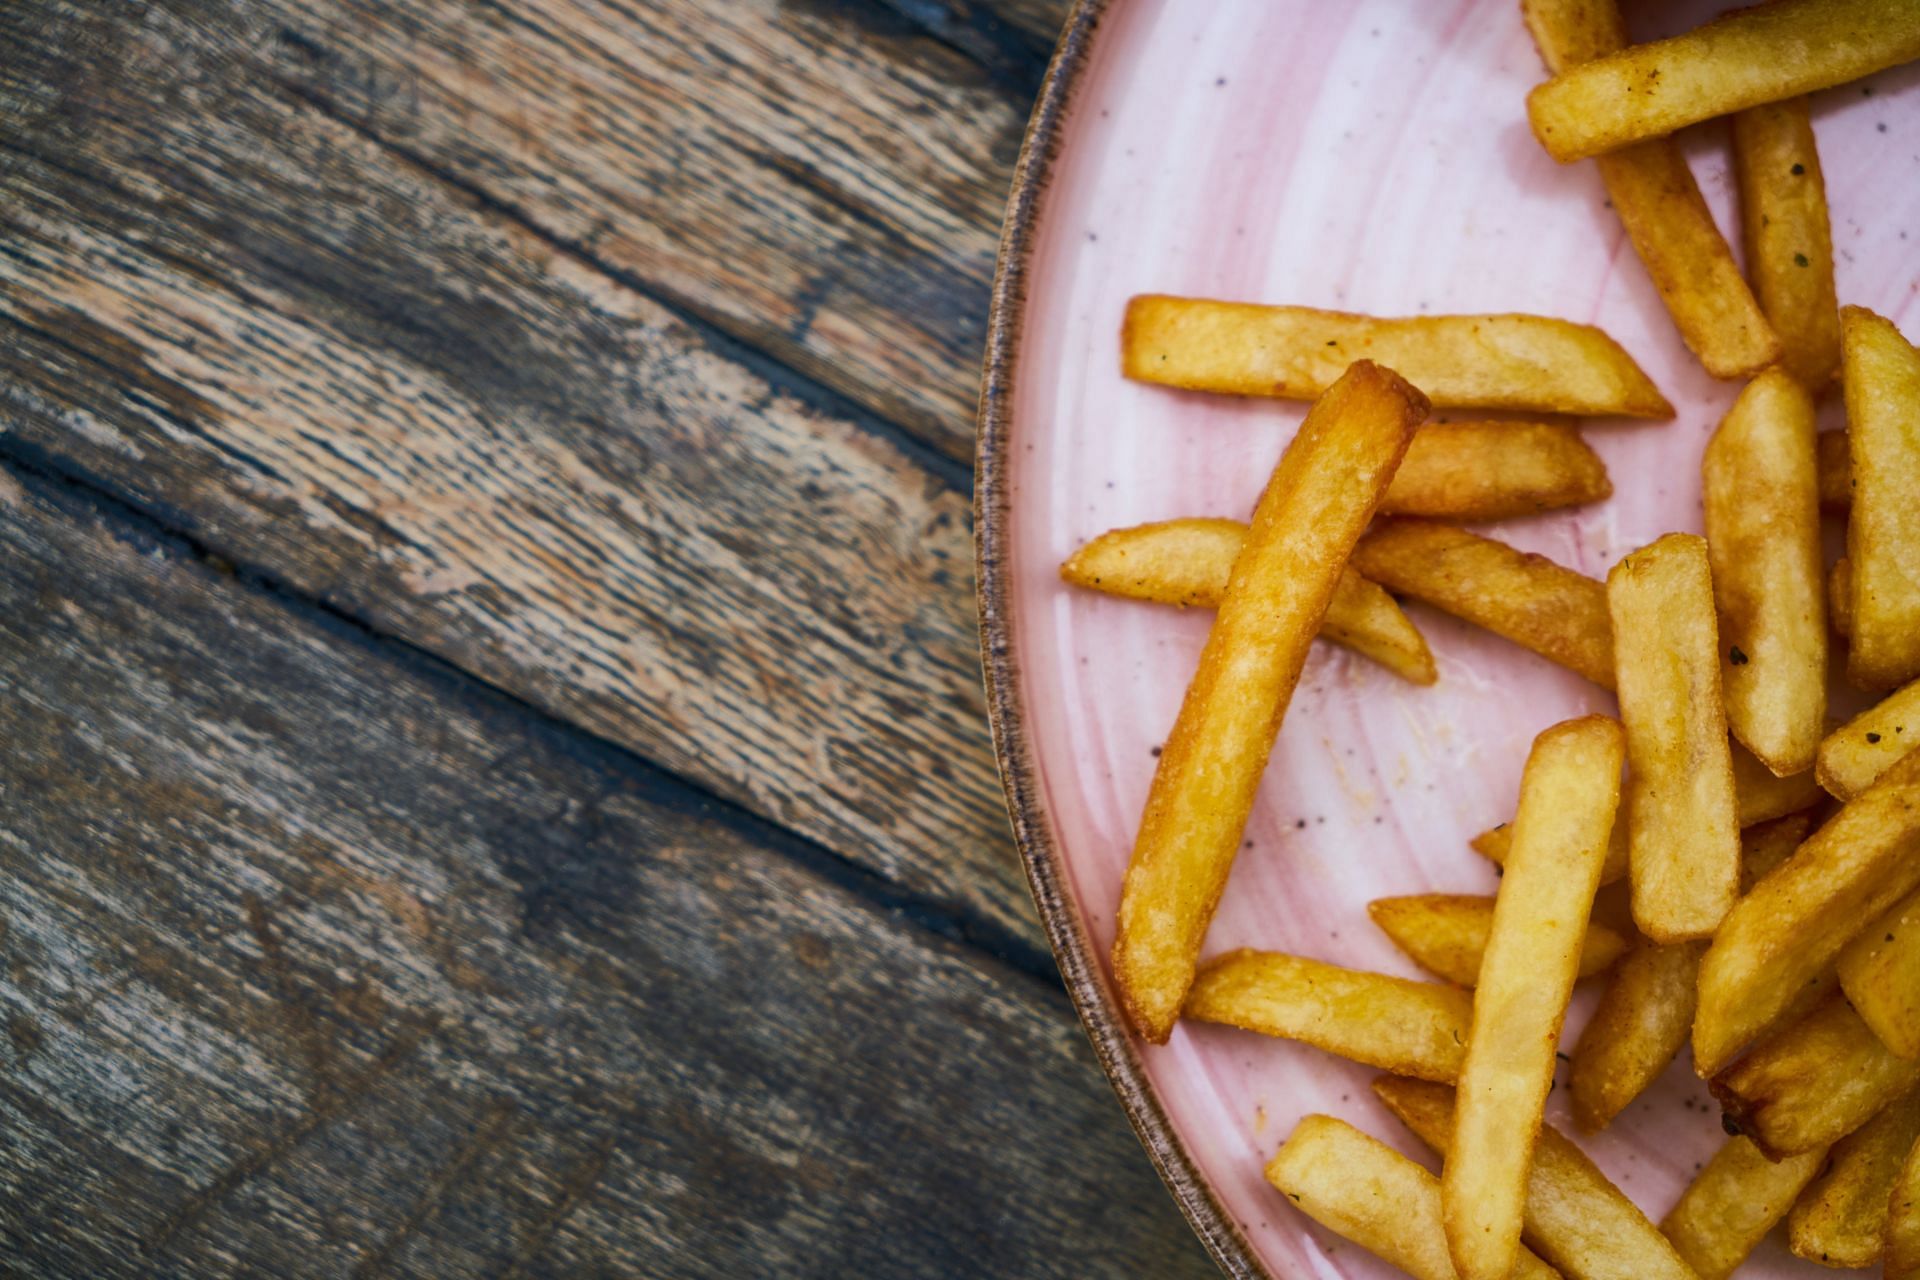 Energy provided by a potato (image sourced via Pexels / Photo by Engin)